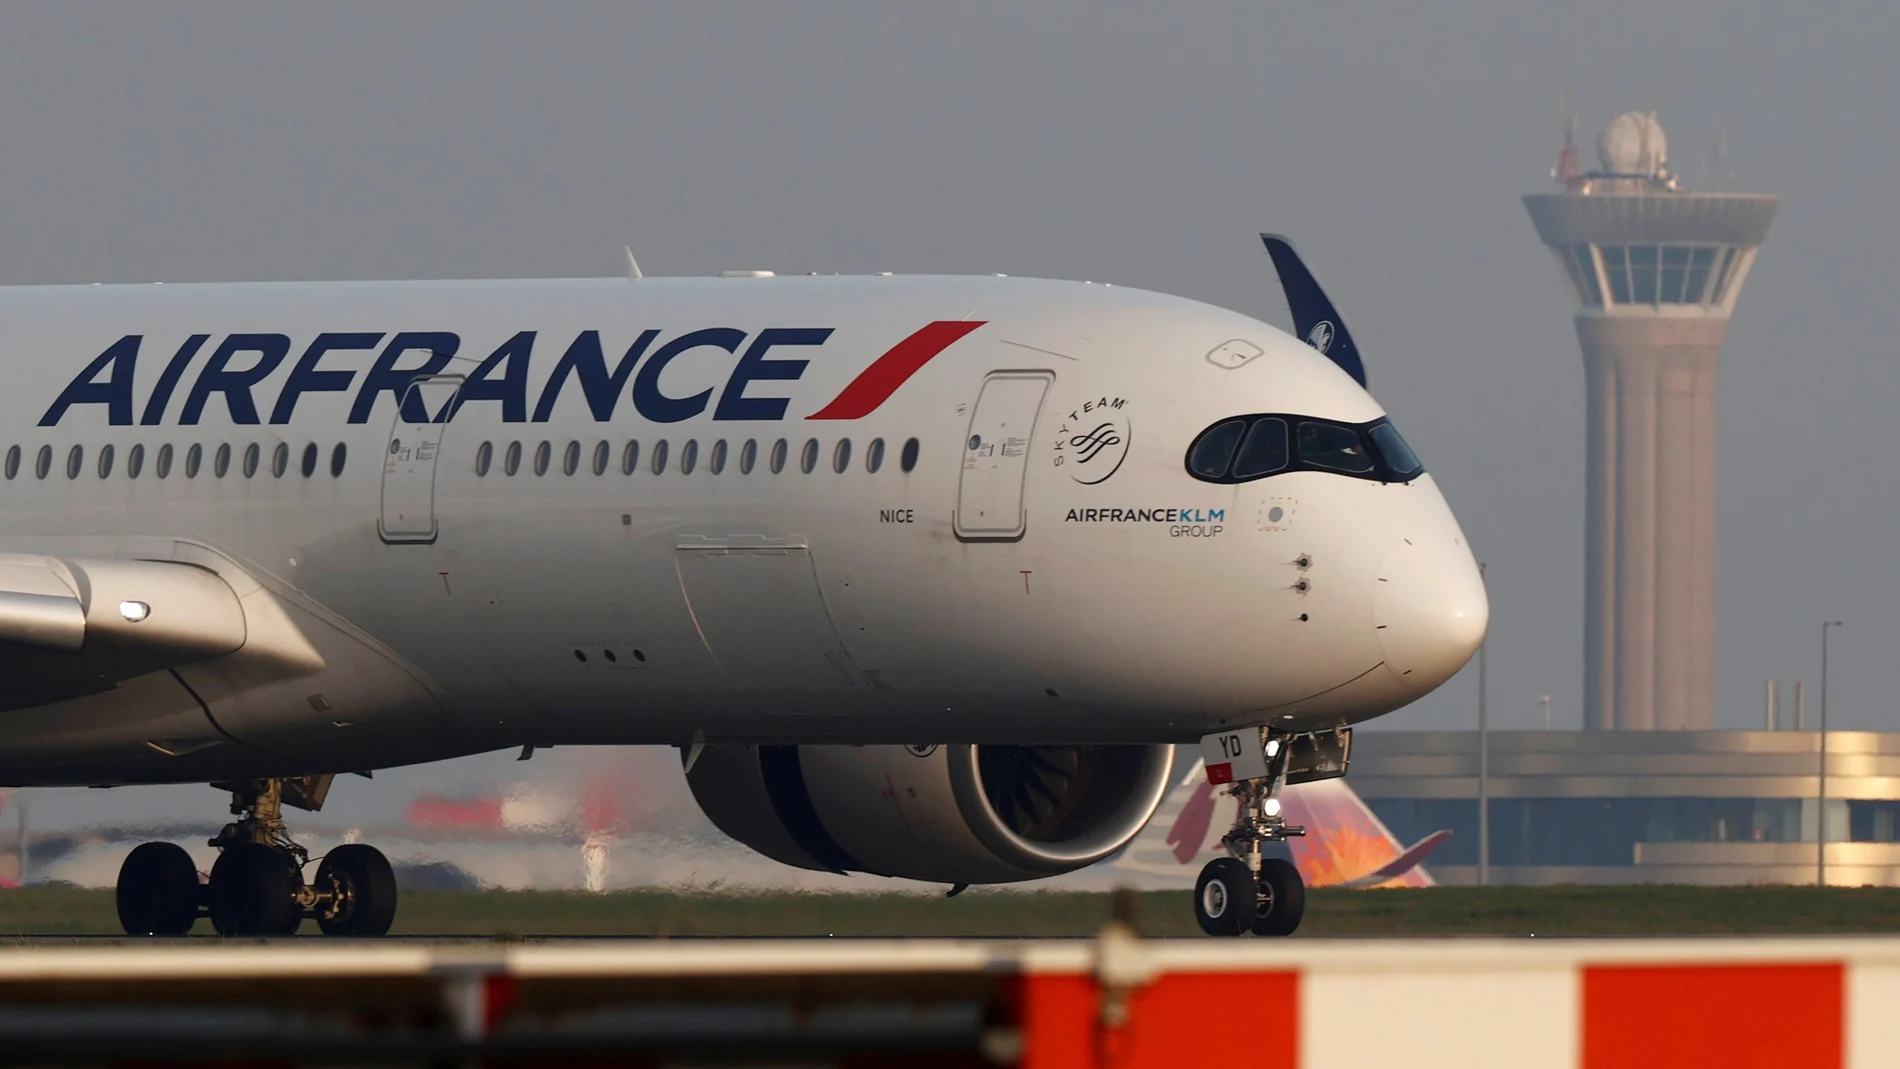 FILE PHOTO: An Air France Airbus A350 airplane lands at the Charles-de-Gaulle airport in Roissy, near Paris, France April 2, 2021. REUTERS/Christian Hartmann/File Photo